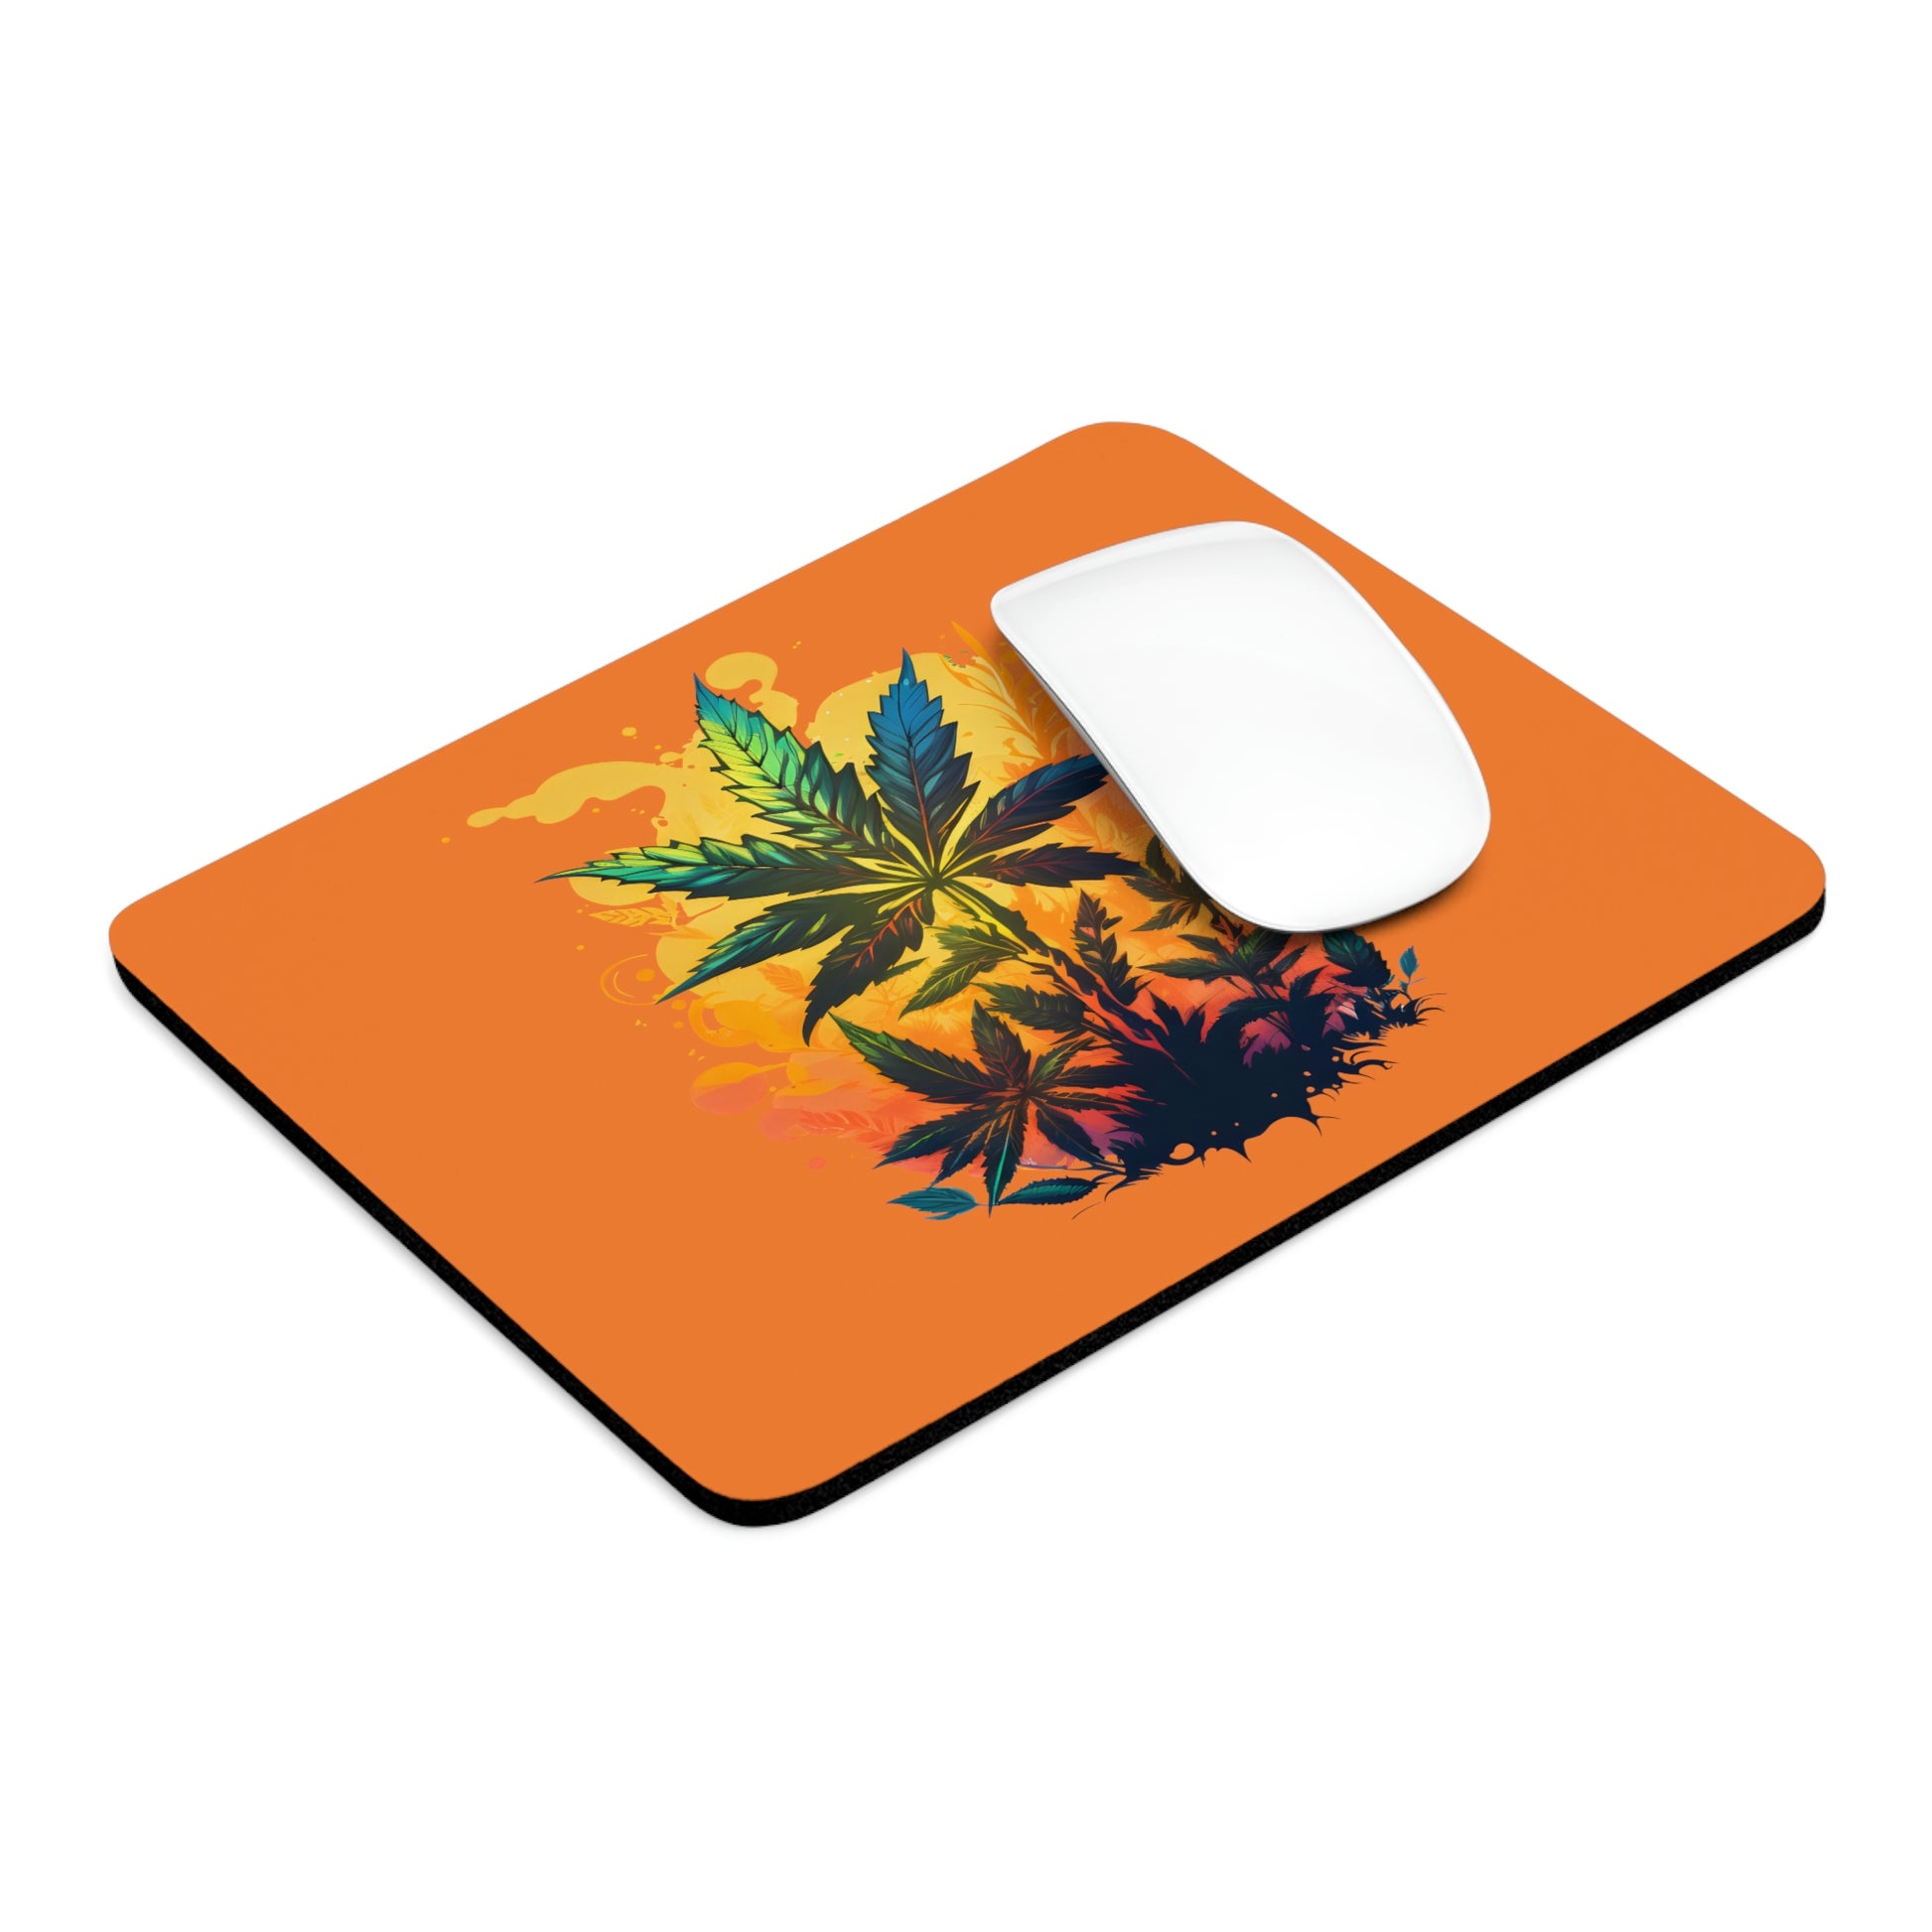 The square Cannabis Warm Paradise Mouse Pad is being used with white wireless mouse. 